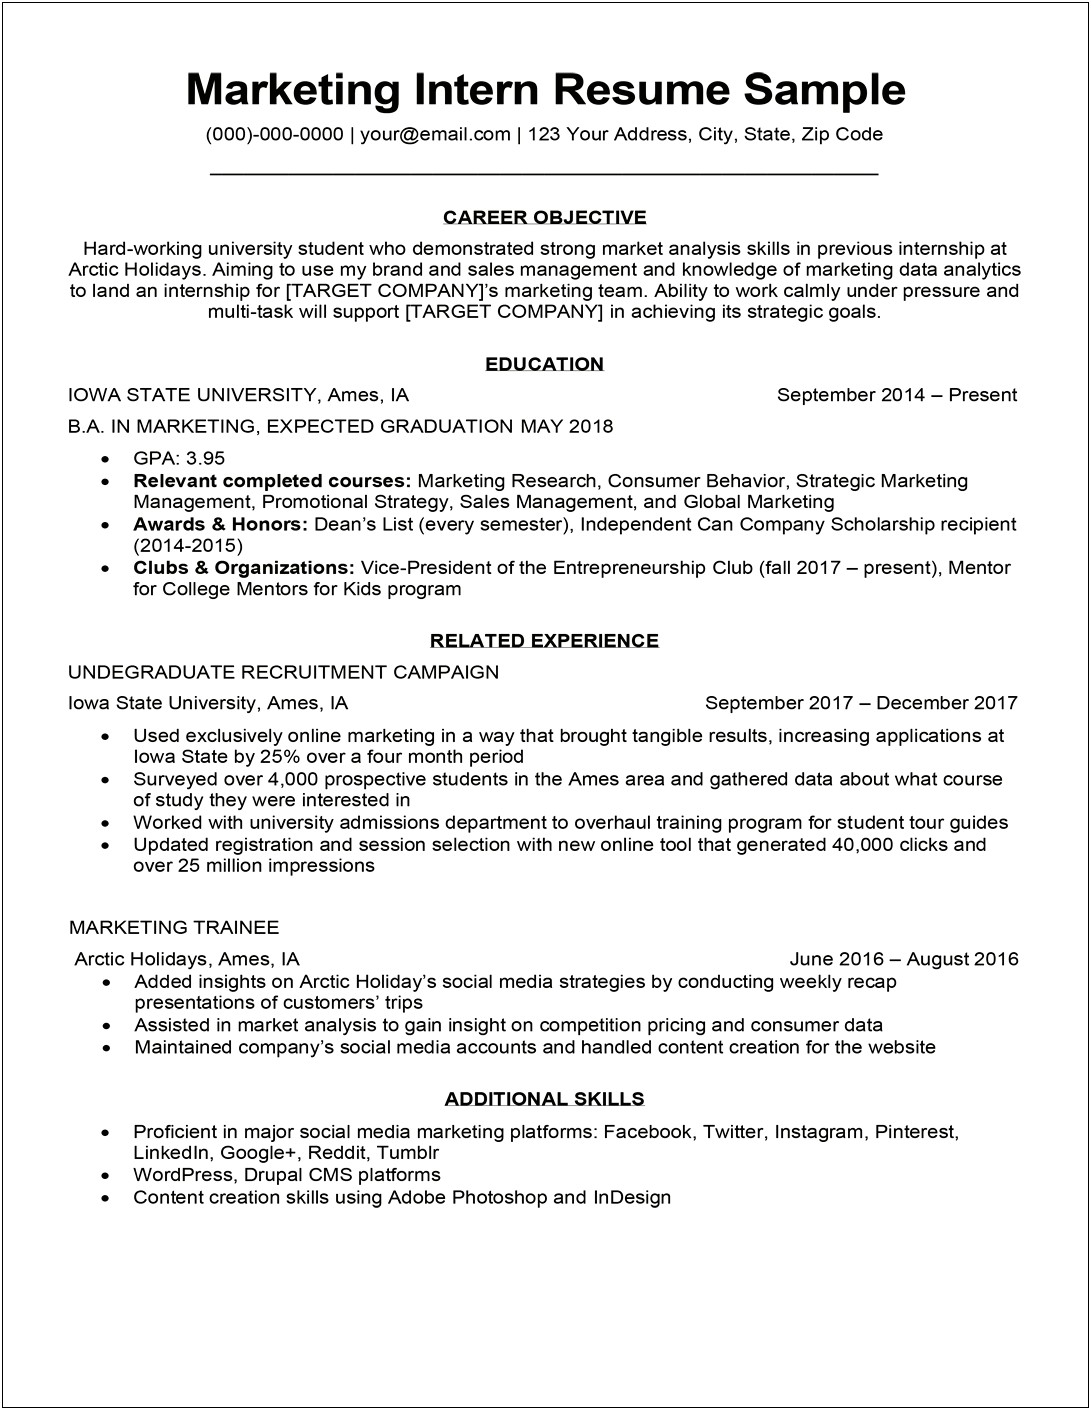 Resume Example For Content Creator